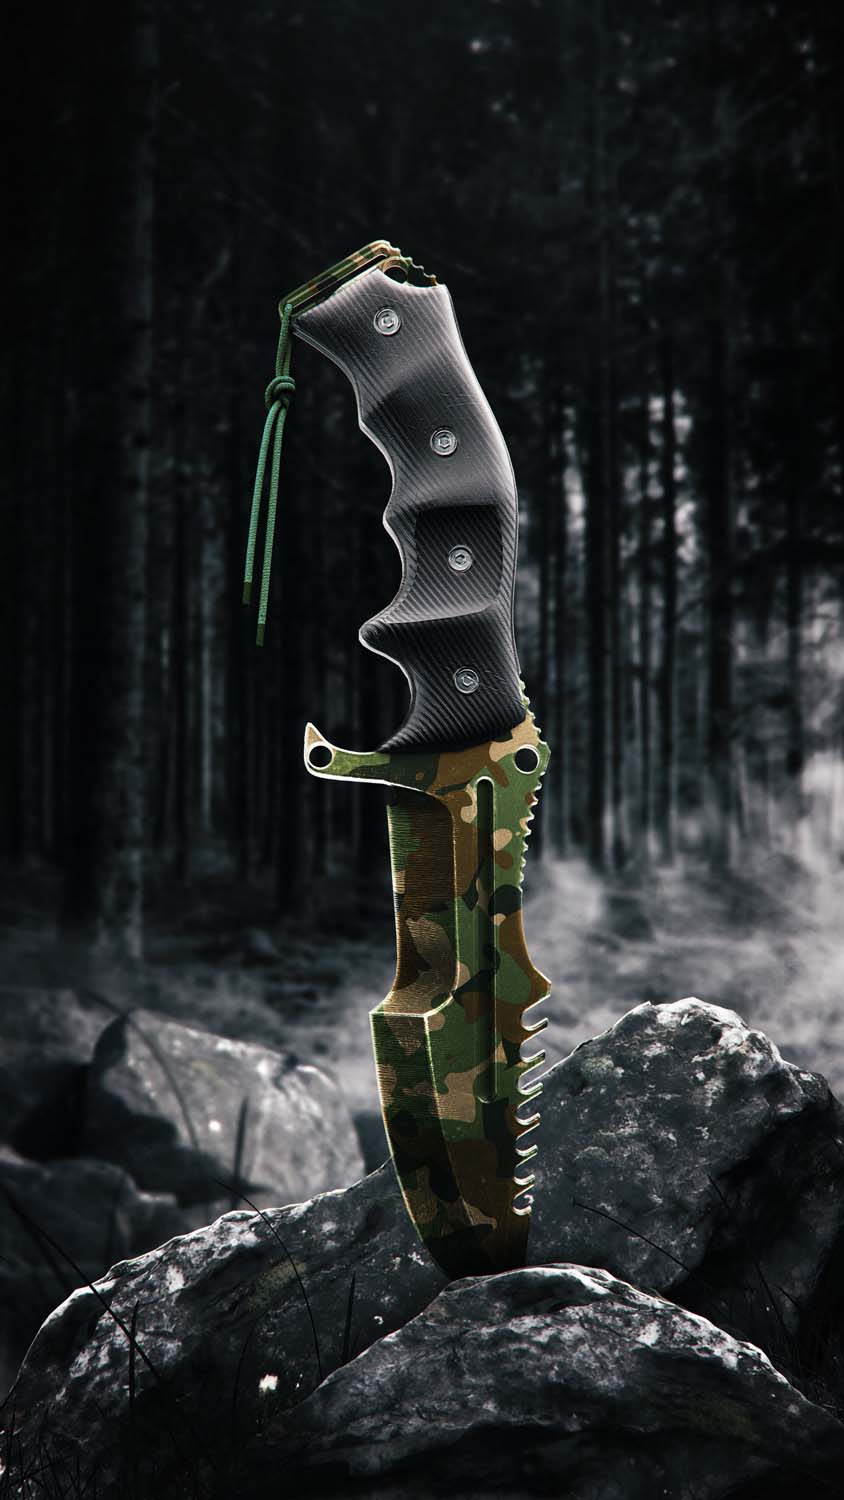 Camouflage Army Knife IPhone Wallpaper HD - IPhone Wallpapers : iPhone  Wallpapers